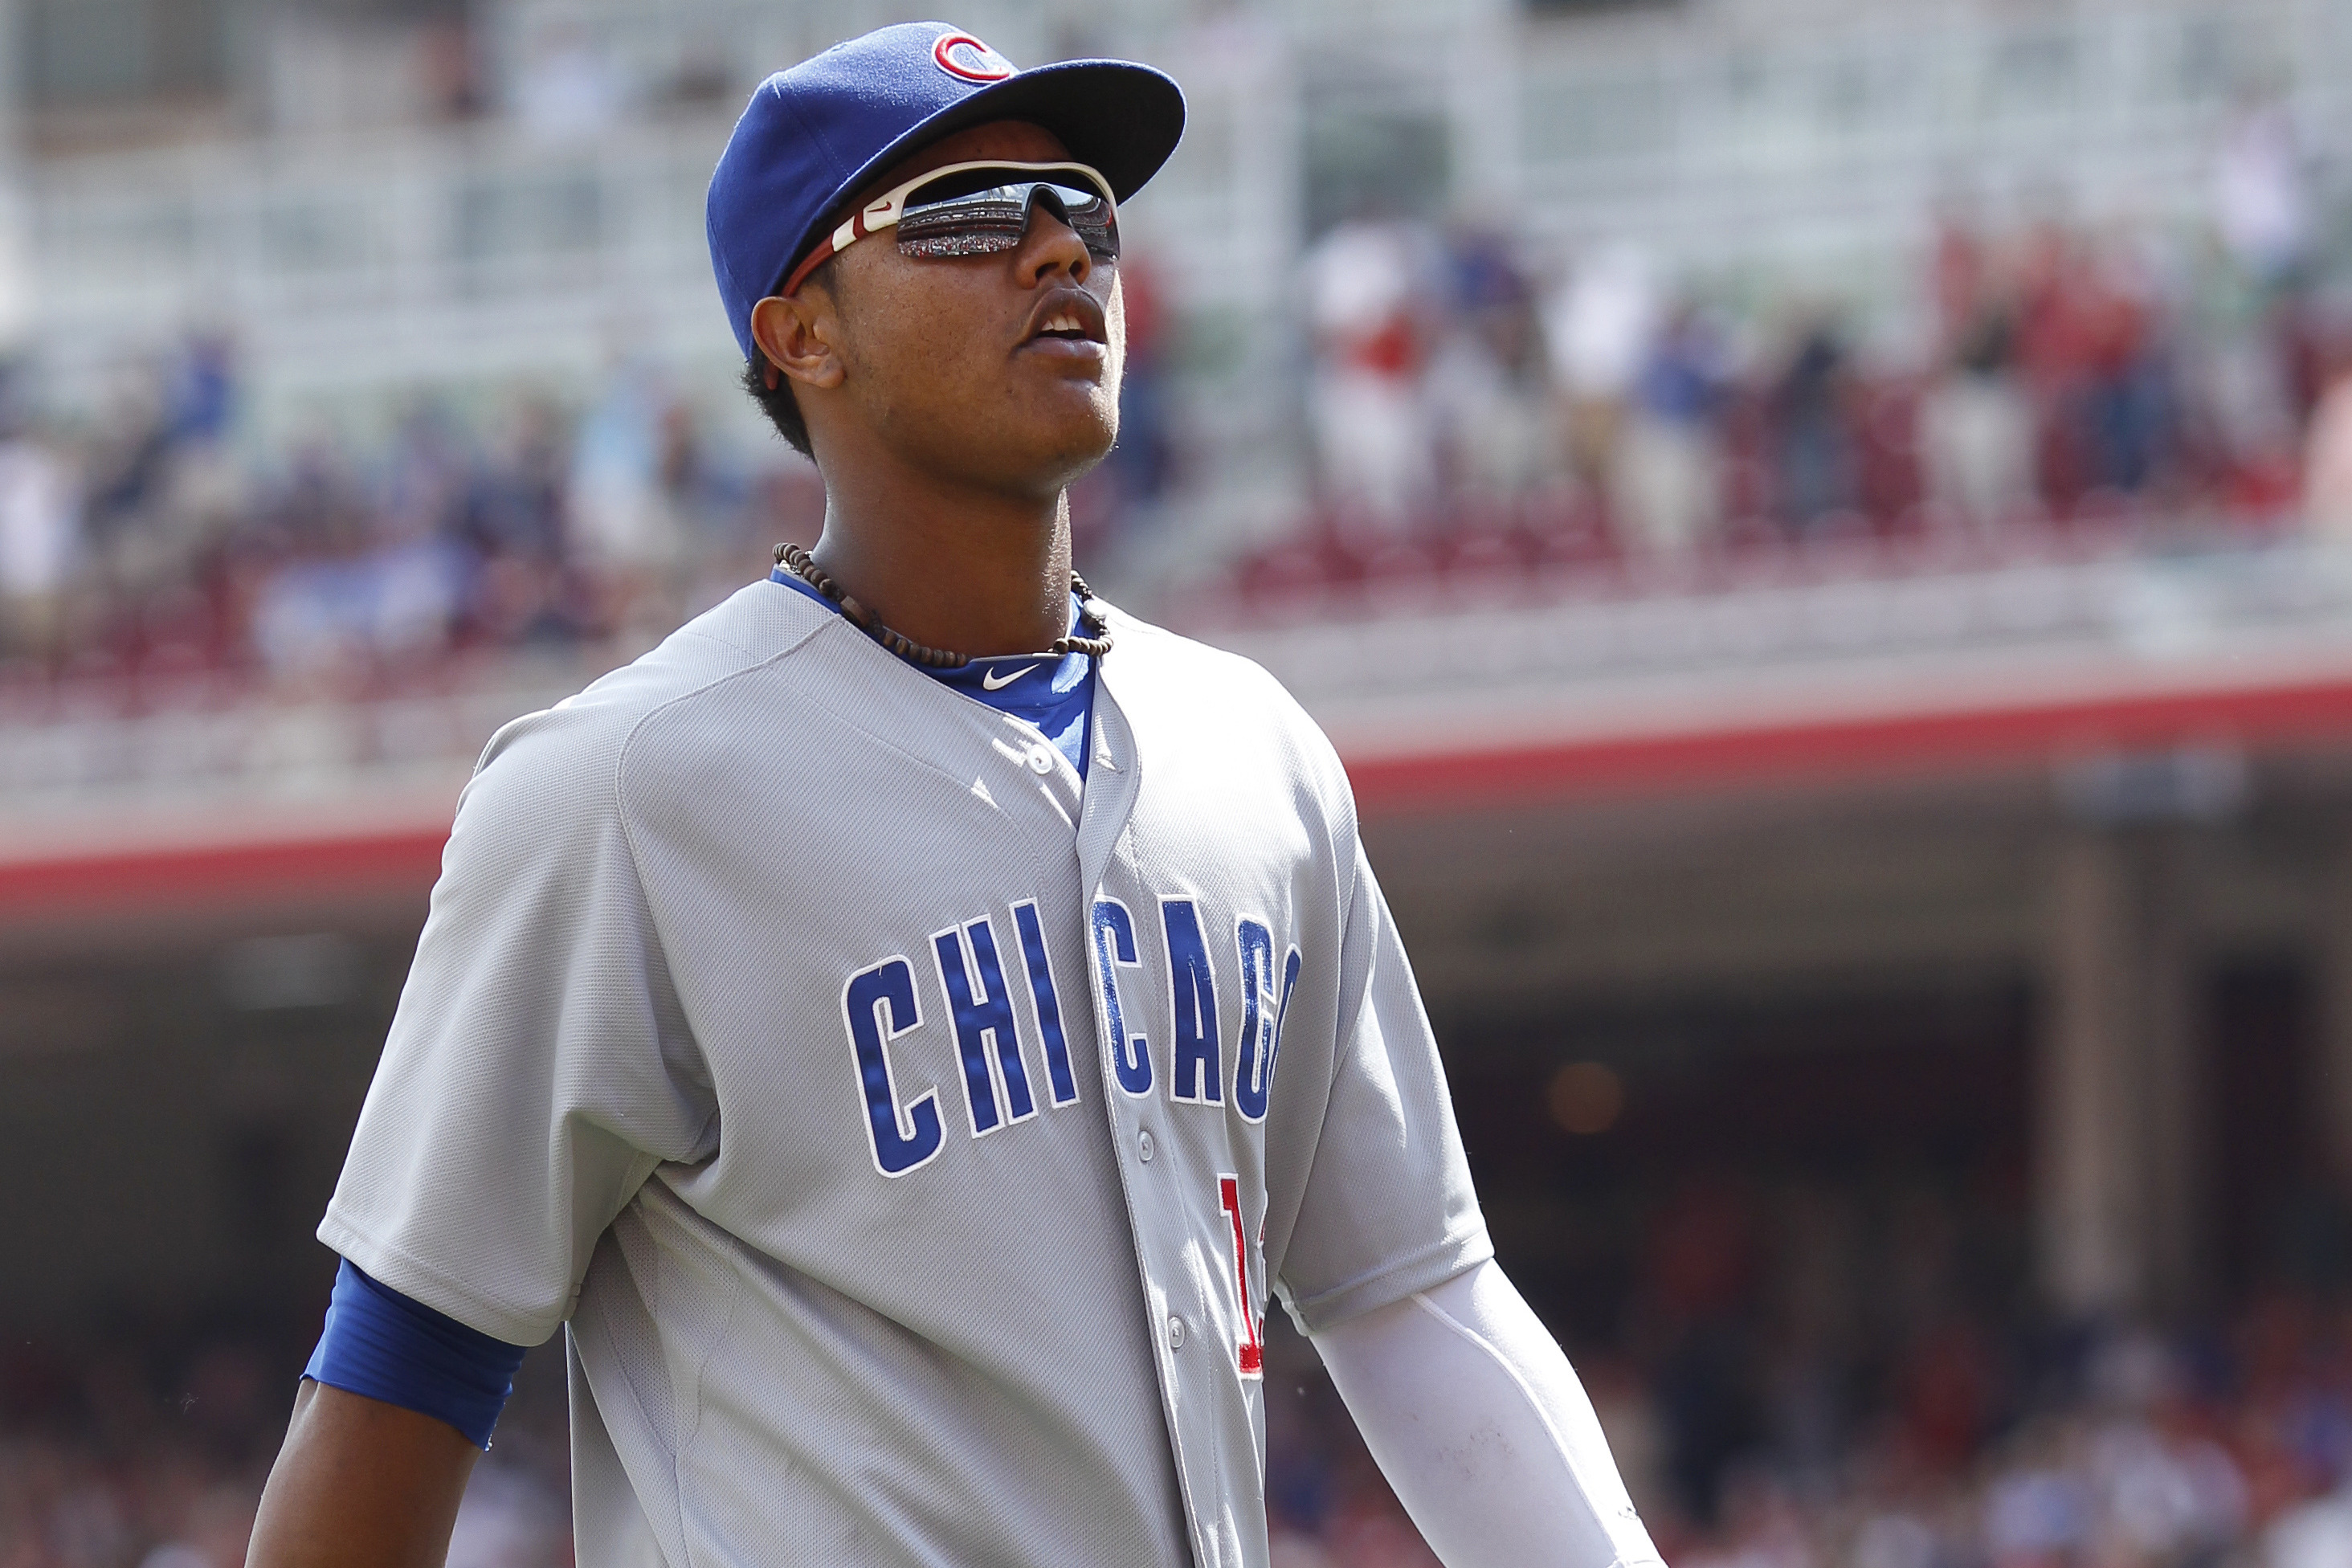 Dale Sveum's Starlin Castro Ultimatum Will Force Cubs to Make